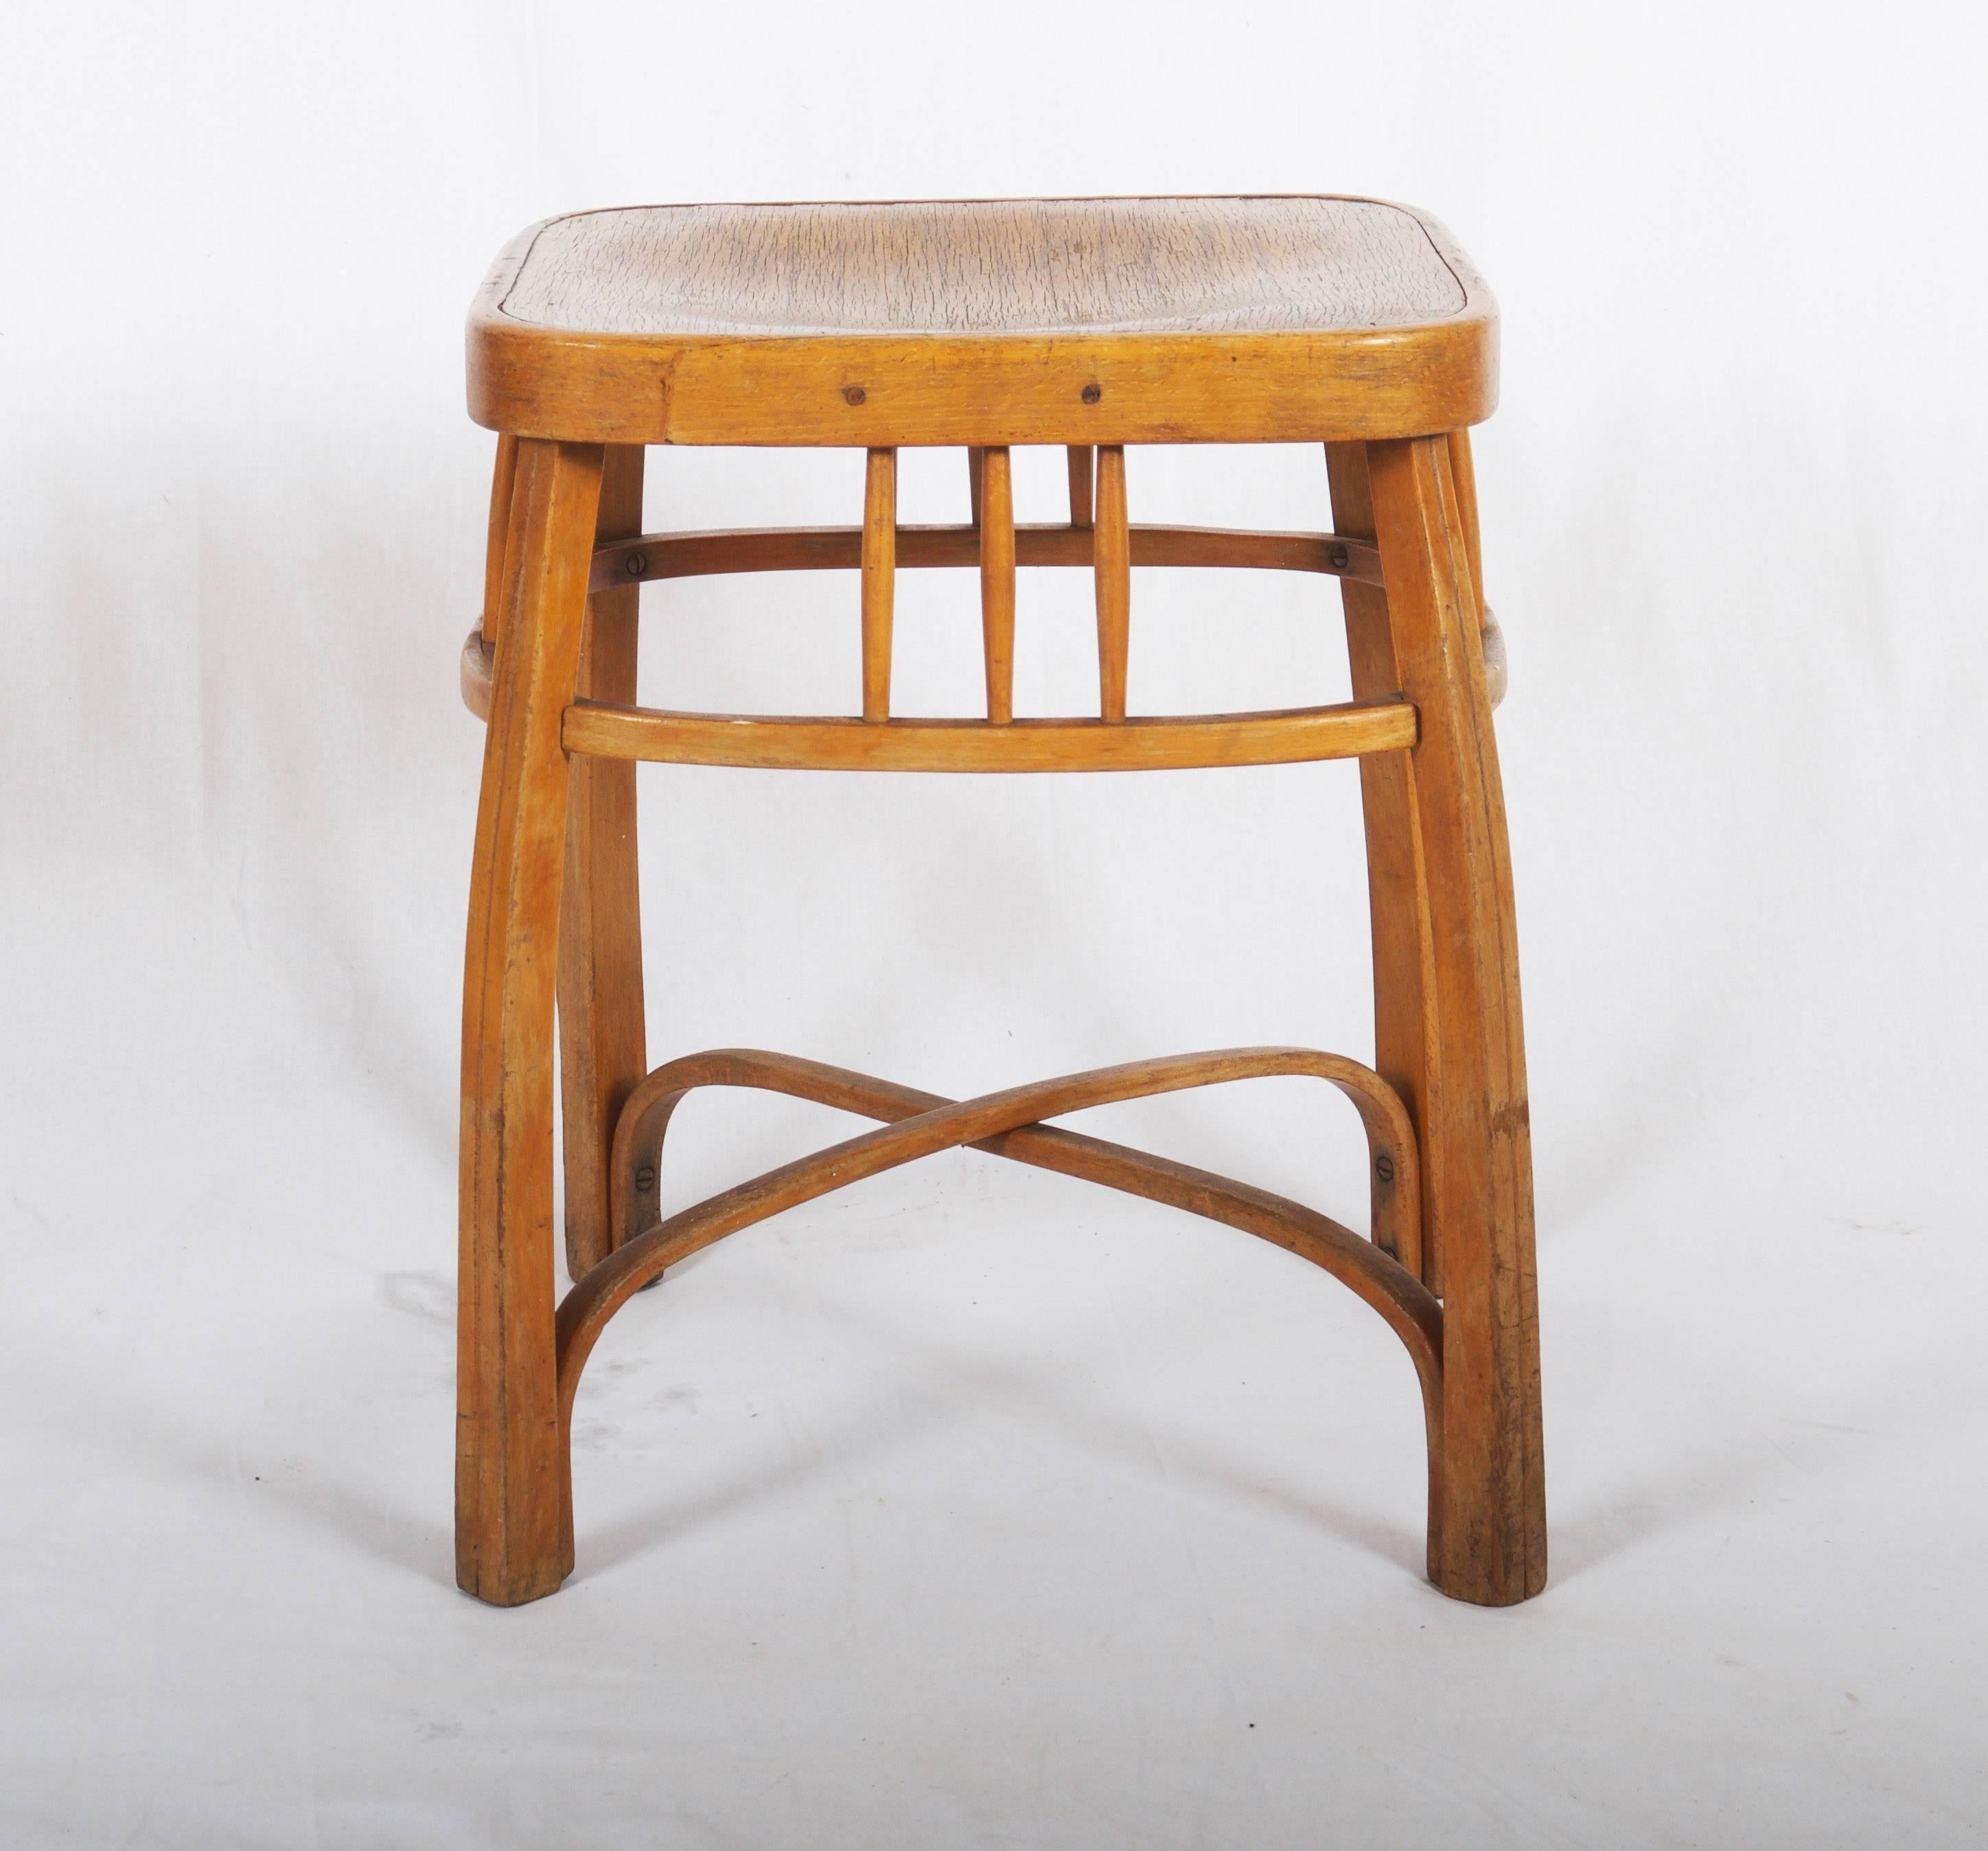 Beech bentwood or plywood designed about 1905 by Otto Wagner for Kohn. Original condition newer restored.